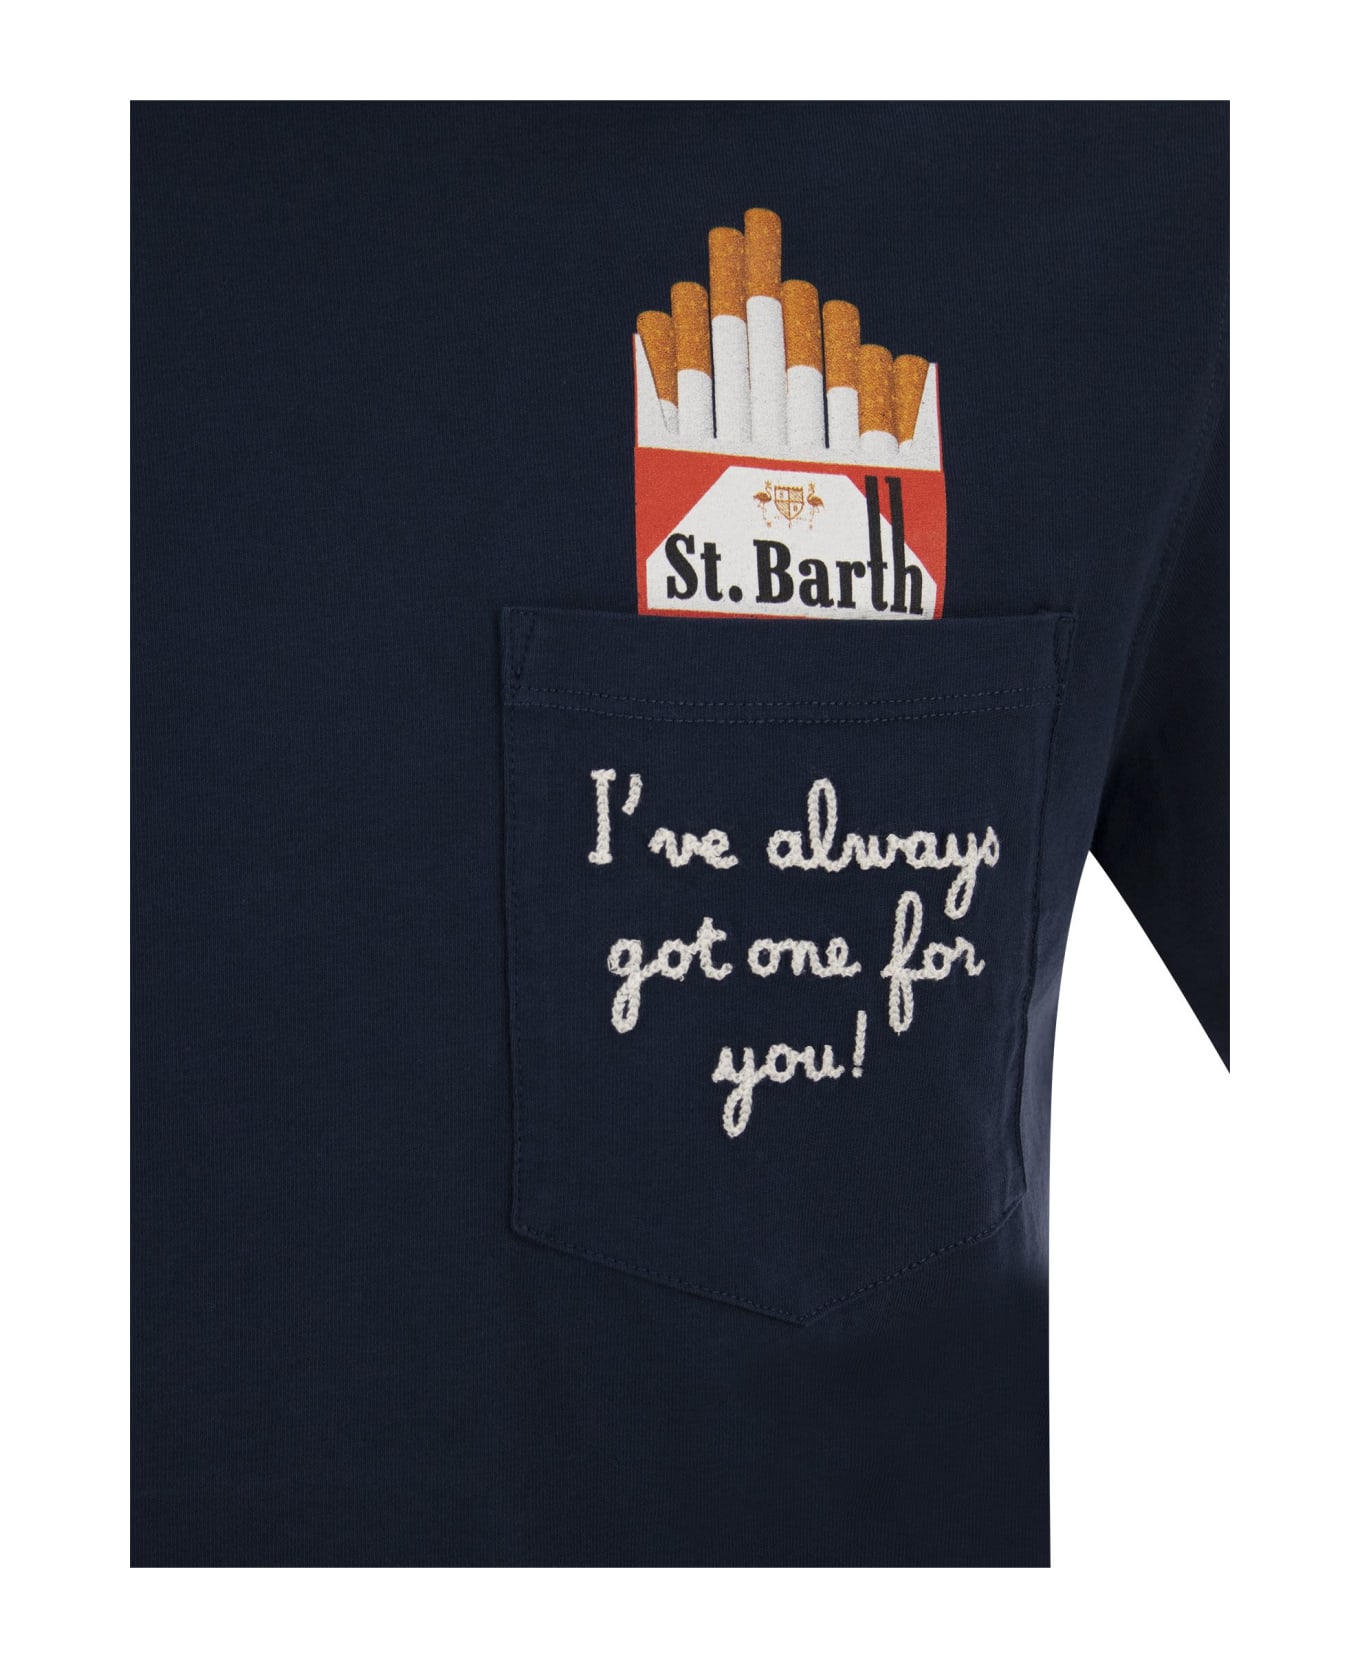 MC2 Saint Barth Cigarette T-shirt With Embroidery On Pocket - Blue シャツ